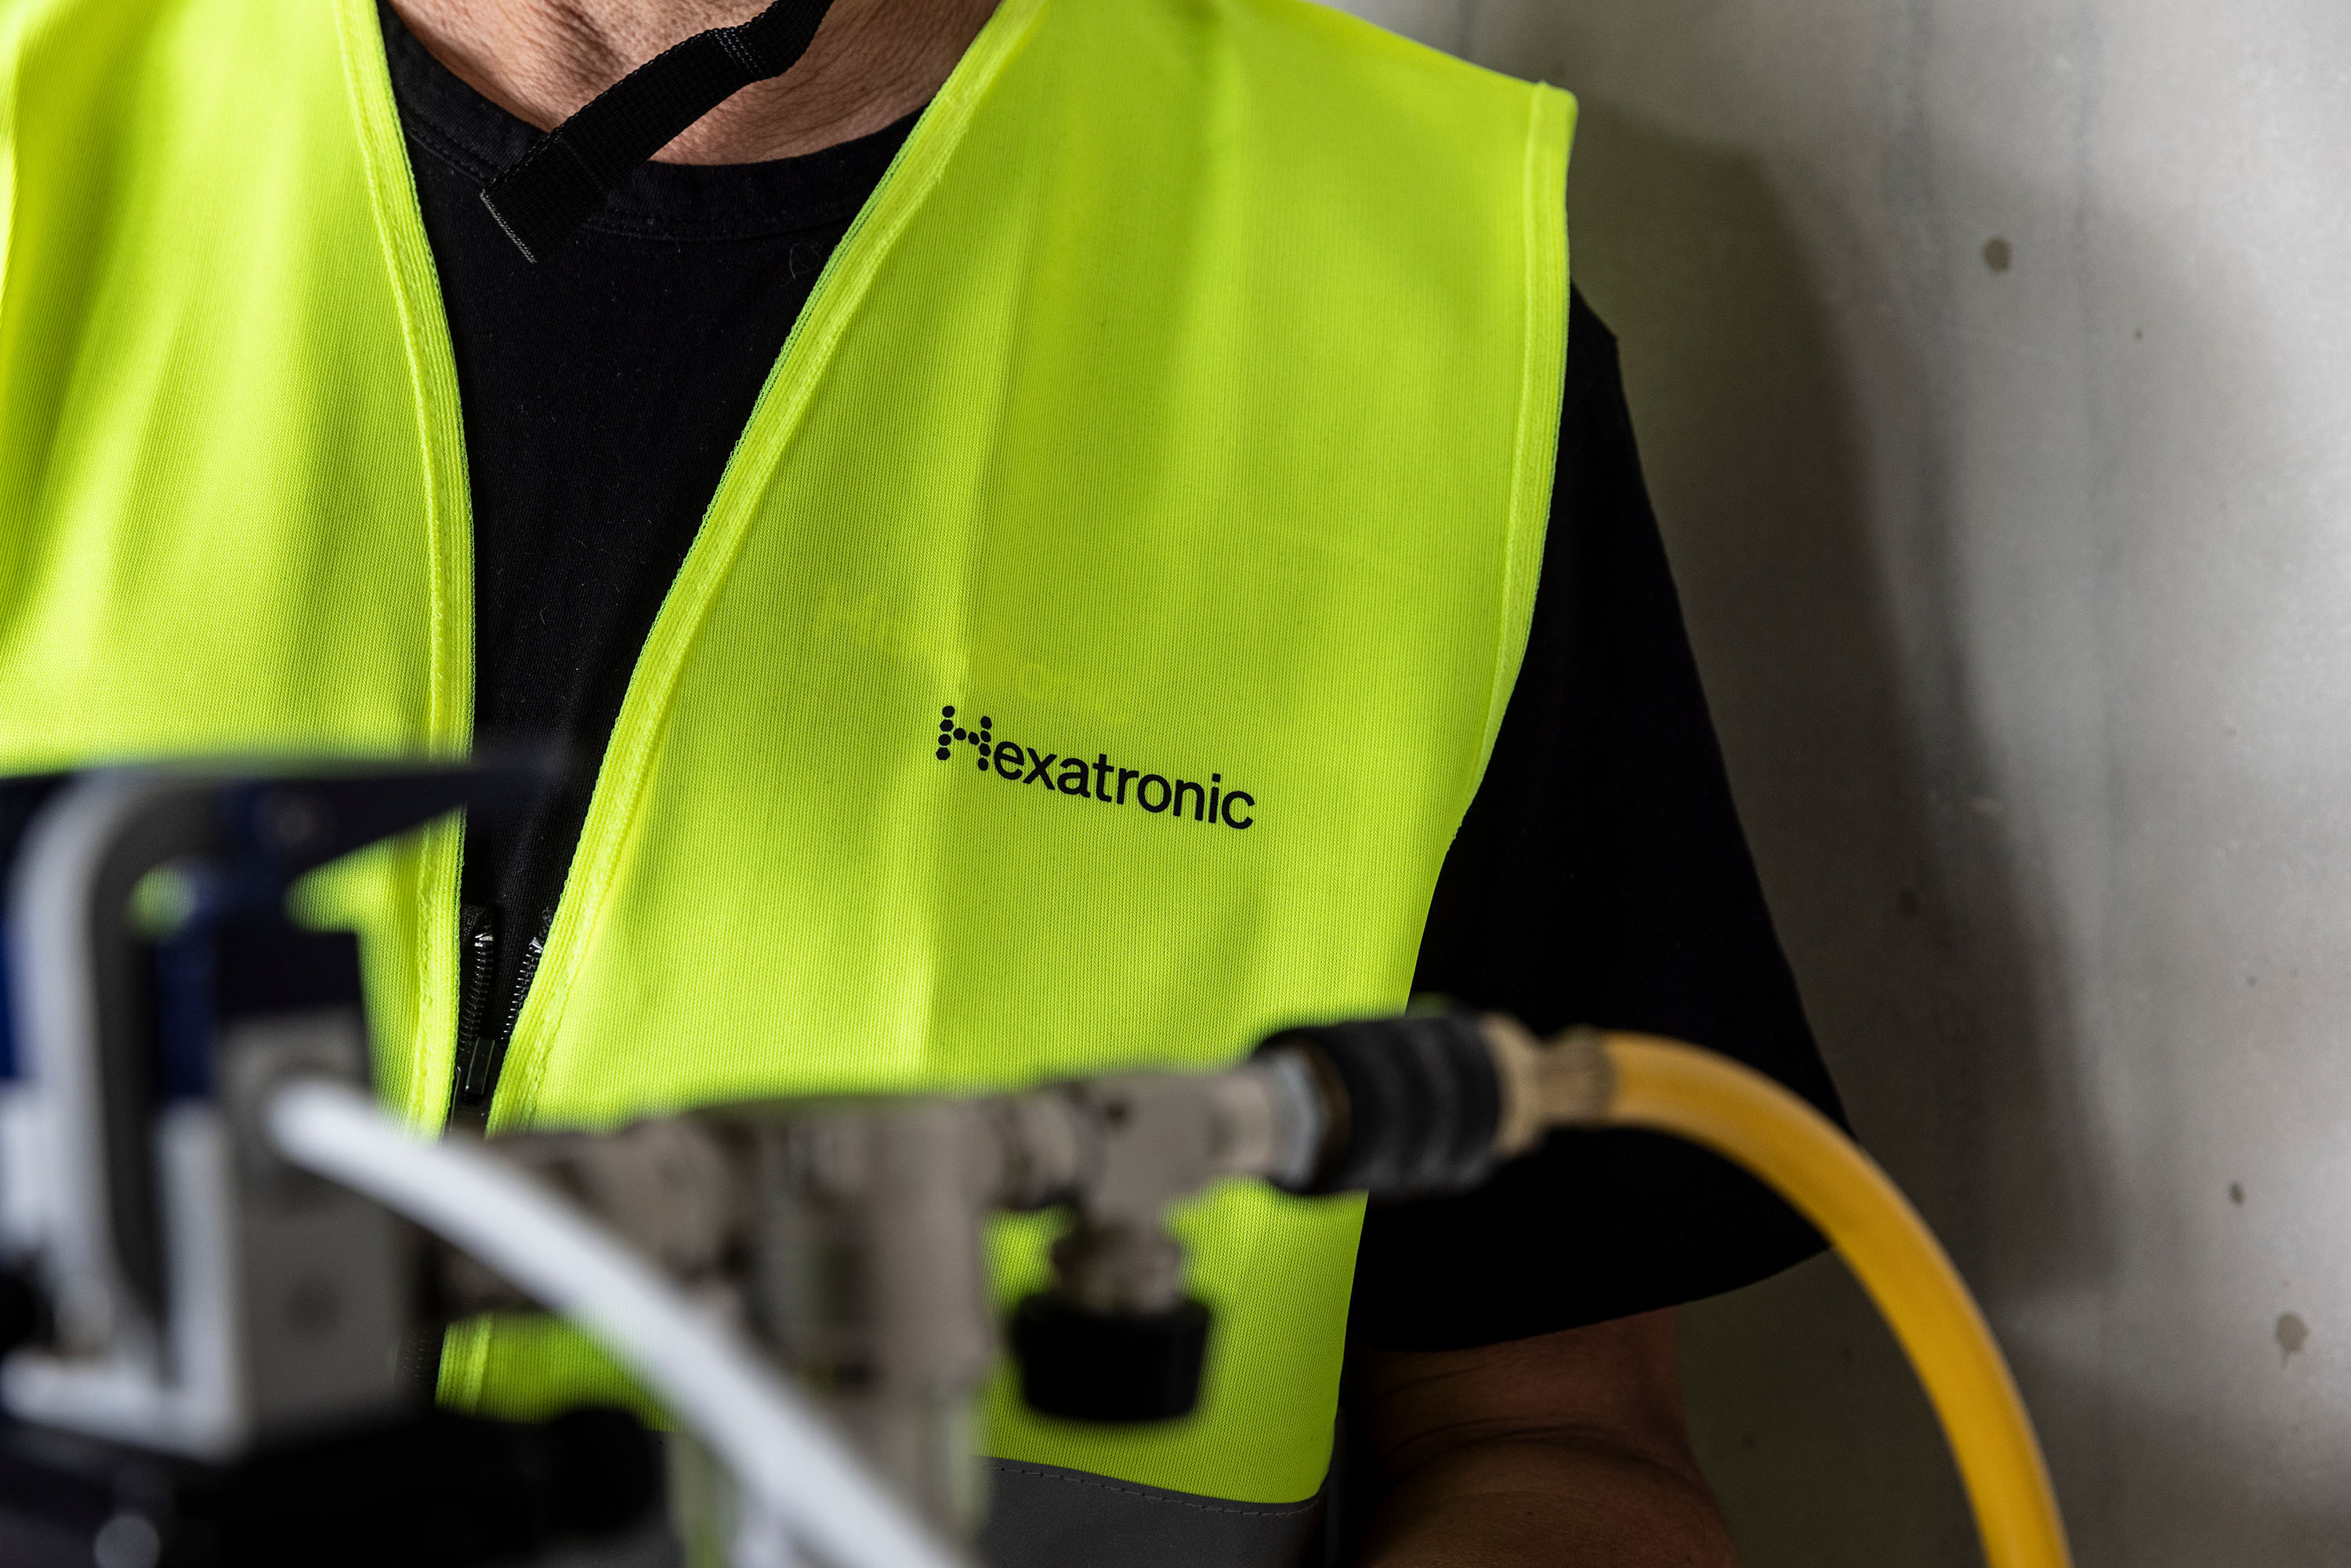 A person in a bright yellow safety vest marked “Hexatronic” is near machinery, indicating an installation work.